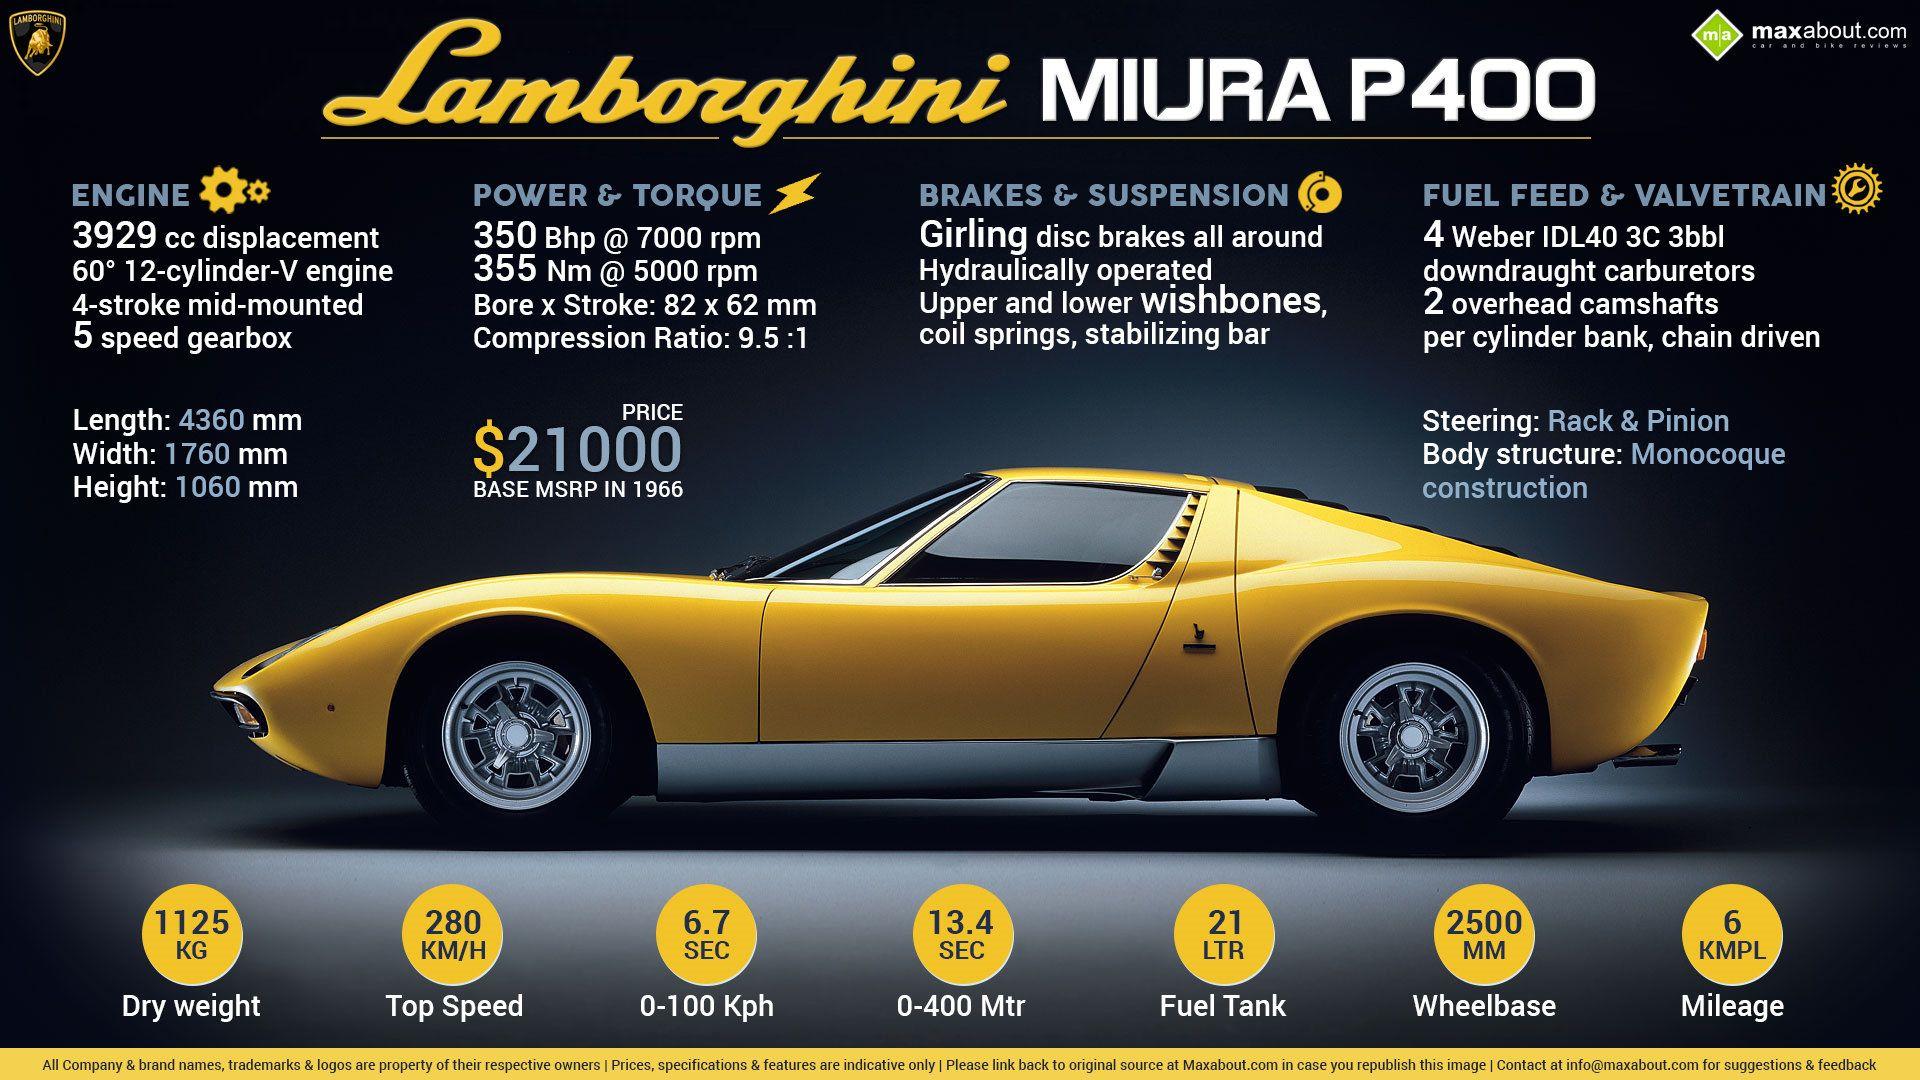 All You Need to Know about the Legendary Lamborghini Miura P400